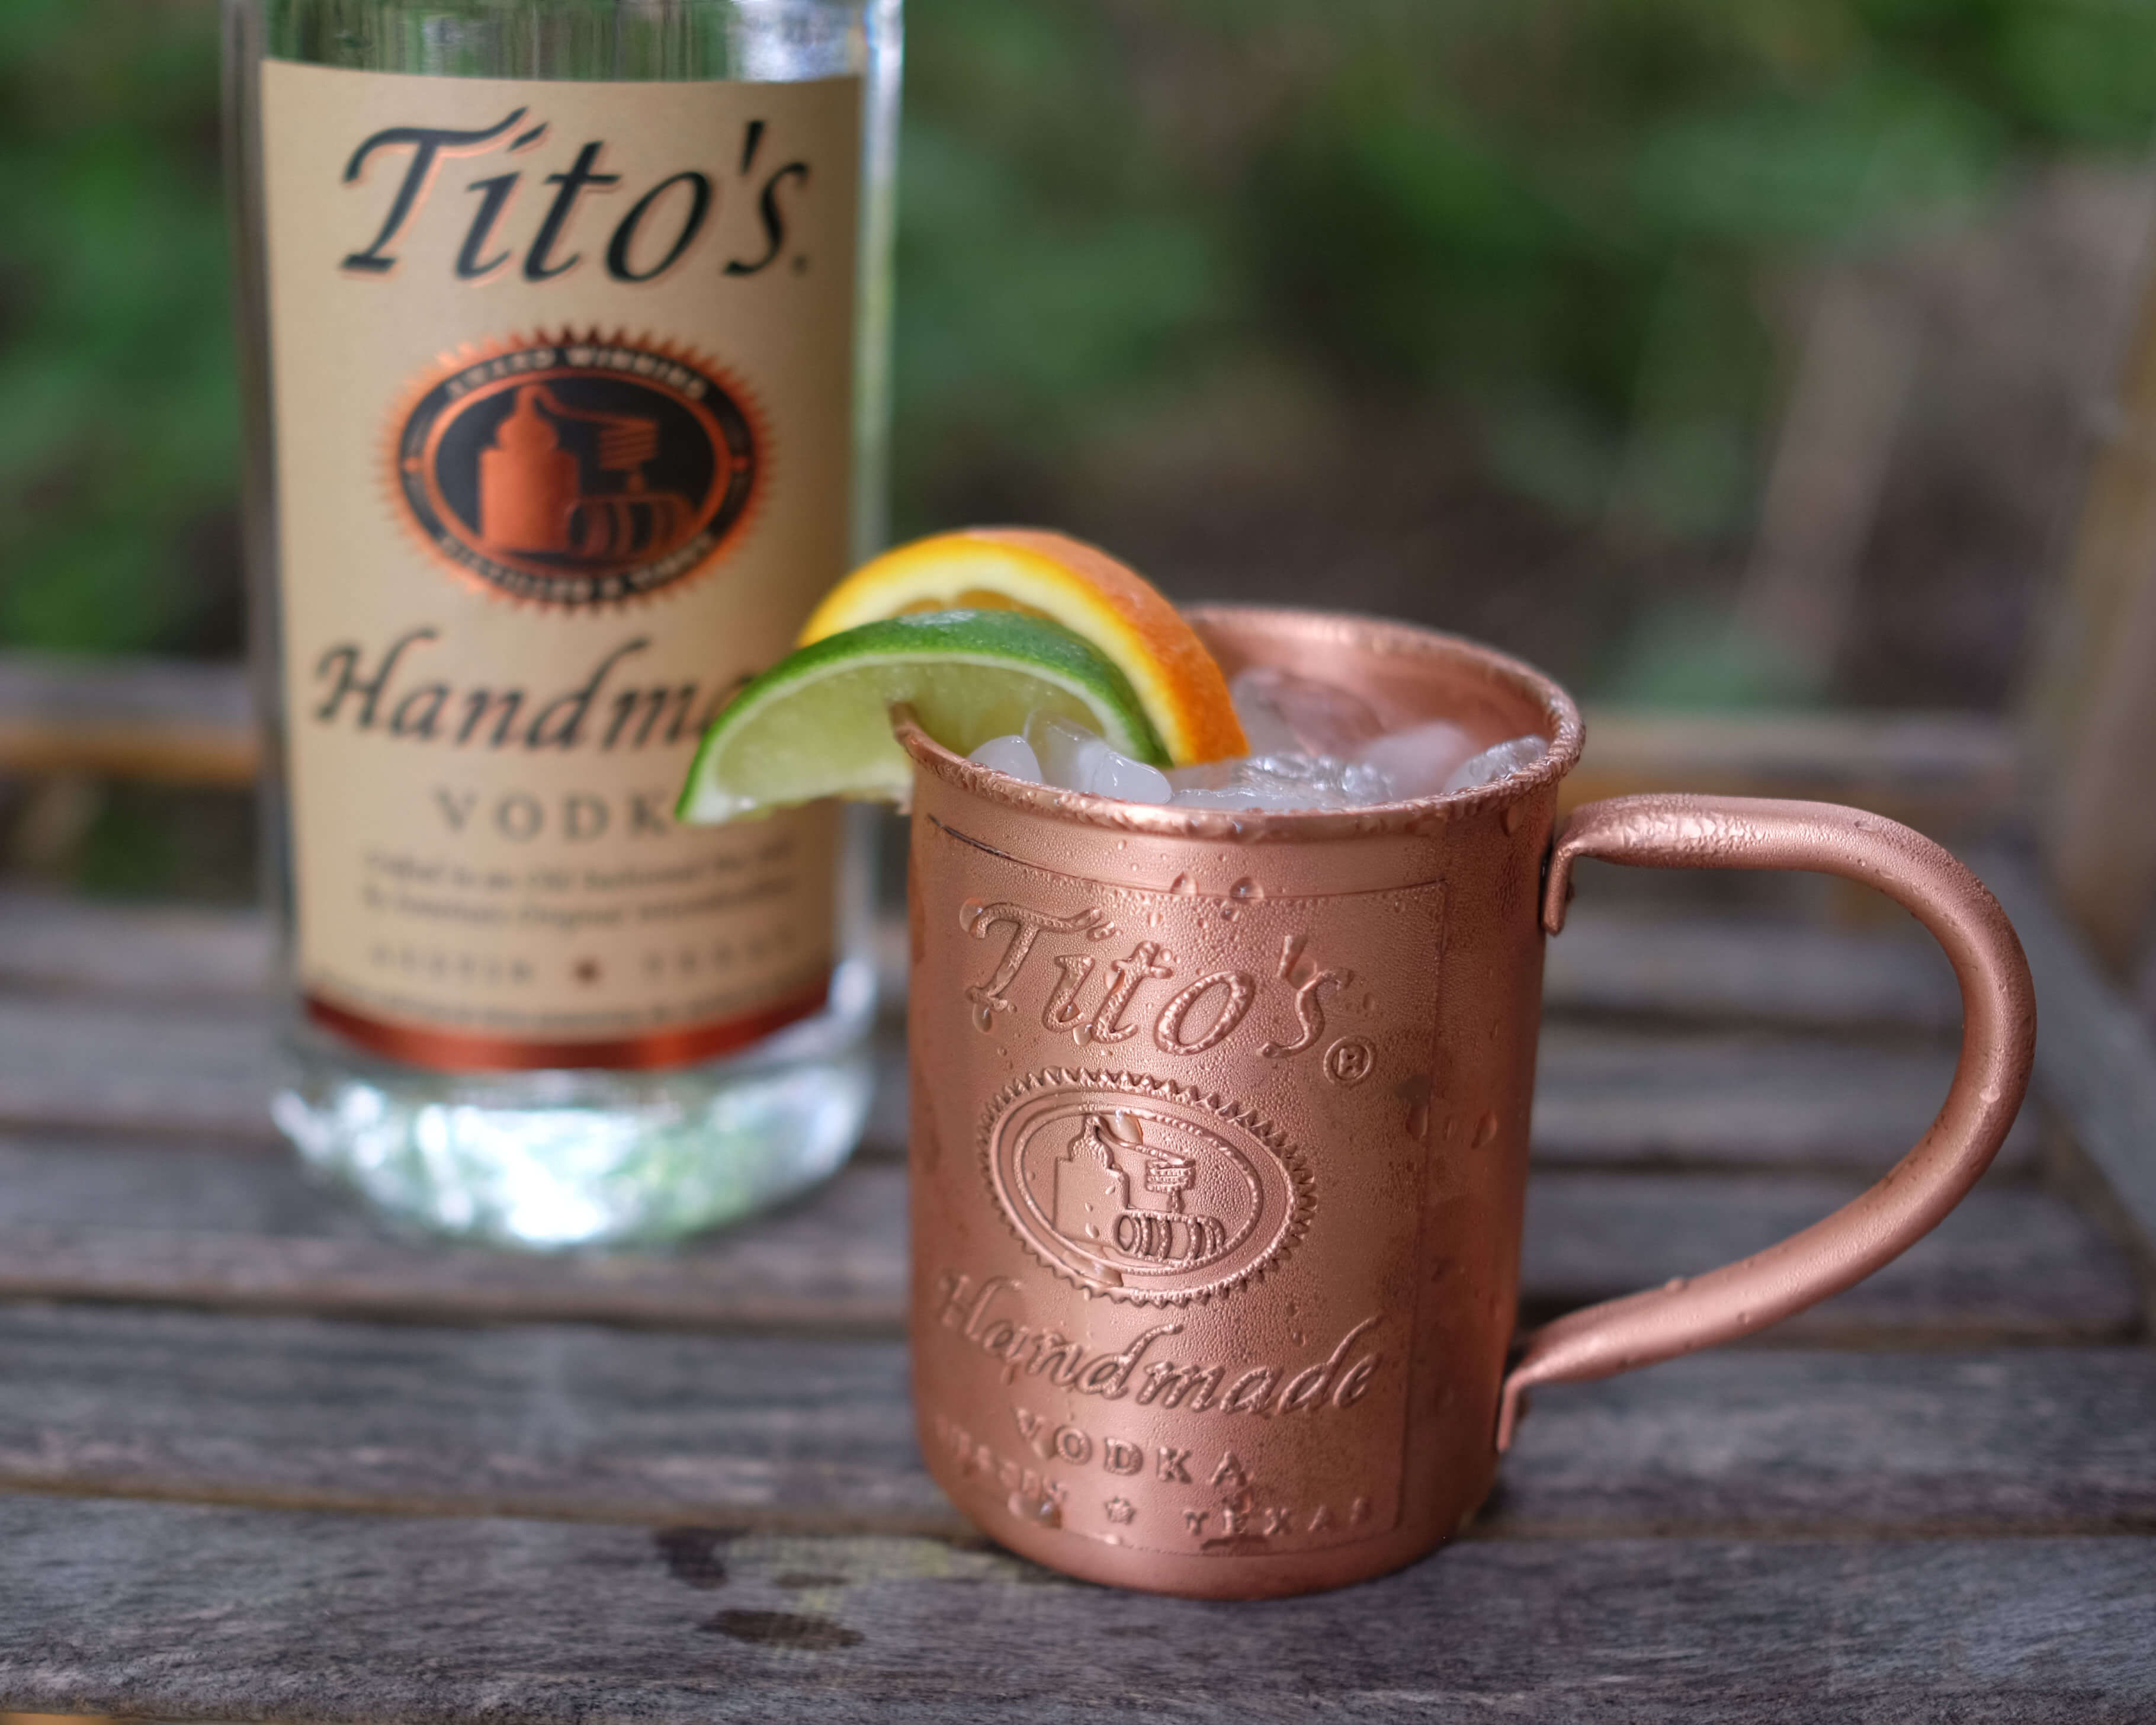 Tito's Handmade Vodka Miracle Mule cocktail recipe - What's Shakin' week of June 5